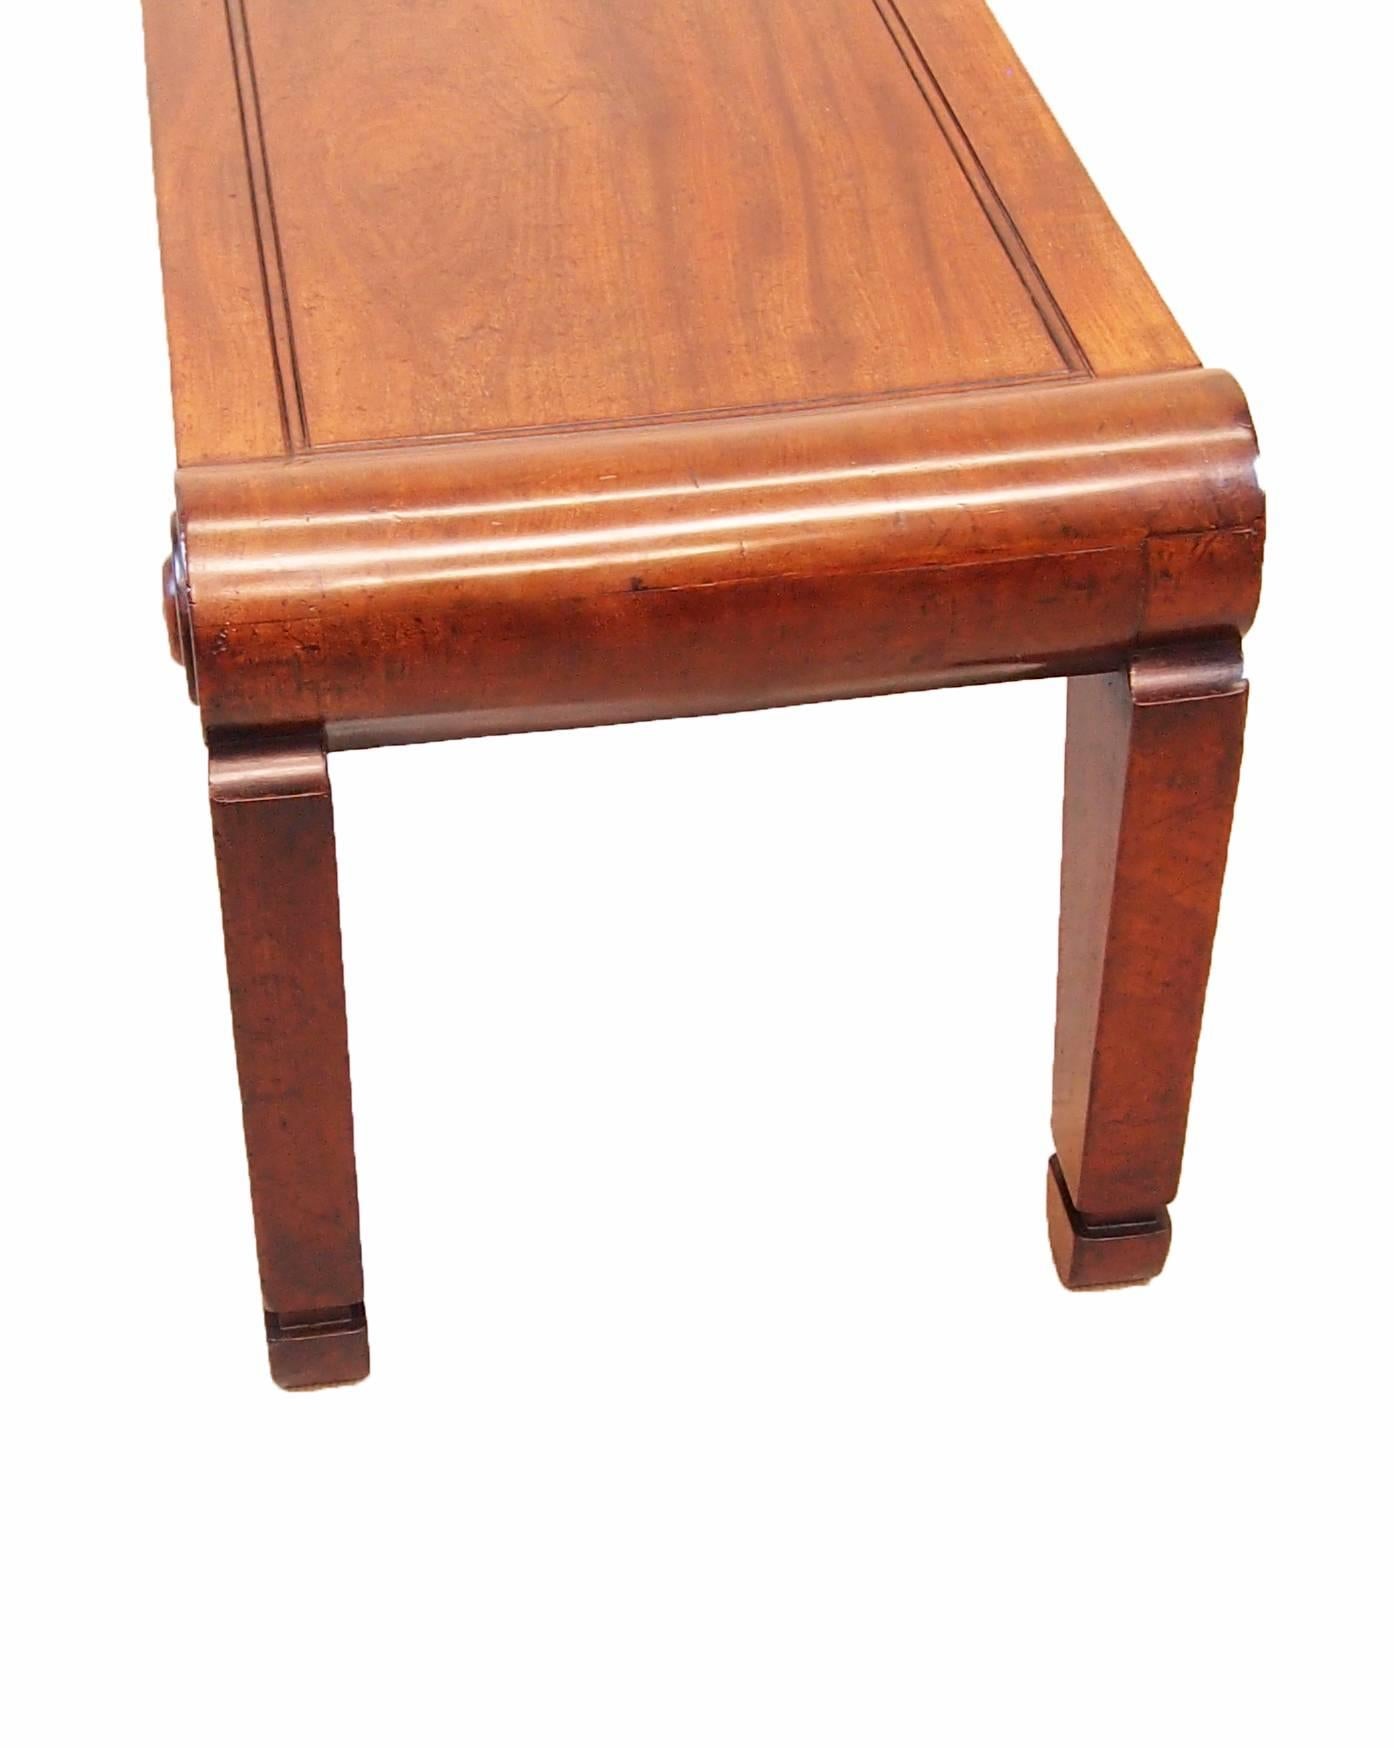 A very fine quality Regency period mahogany hall bench/seat, in the manner of Charles Heathcote 
Tatham, with superbly figured panelled seat and scrolling ends raised on elegant tapered legs
Mounted with applied roundels.